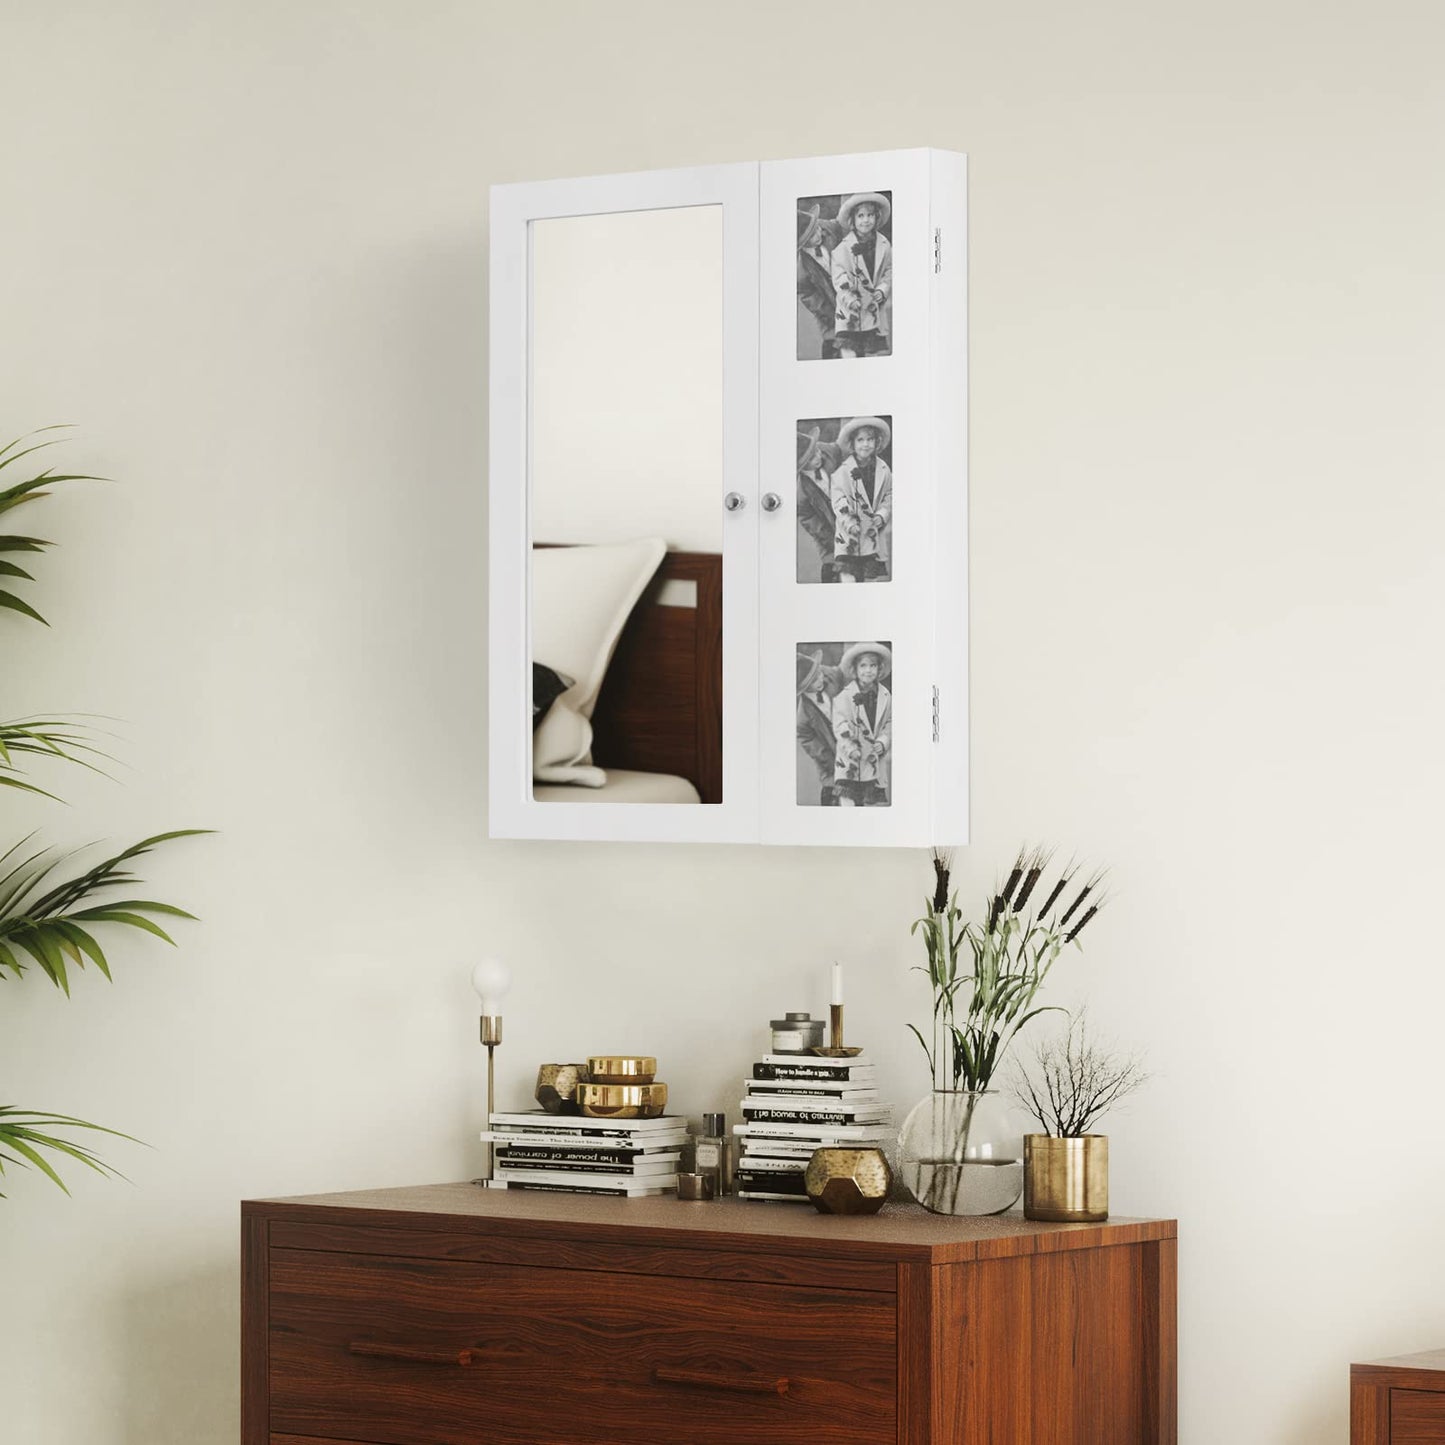 Jewelry Storage Cabnet with Mirror, Wooden Wall Mounted Jewelry Cabinet With Photo Frame, Multi-Layer Storage And Jewelry Storage - White (17.32 x